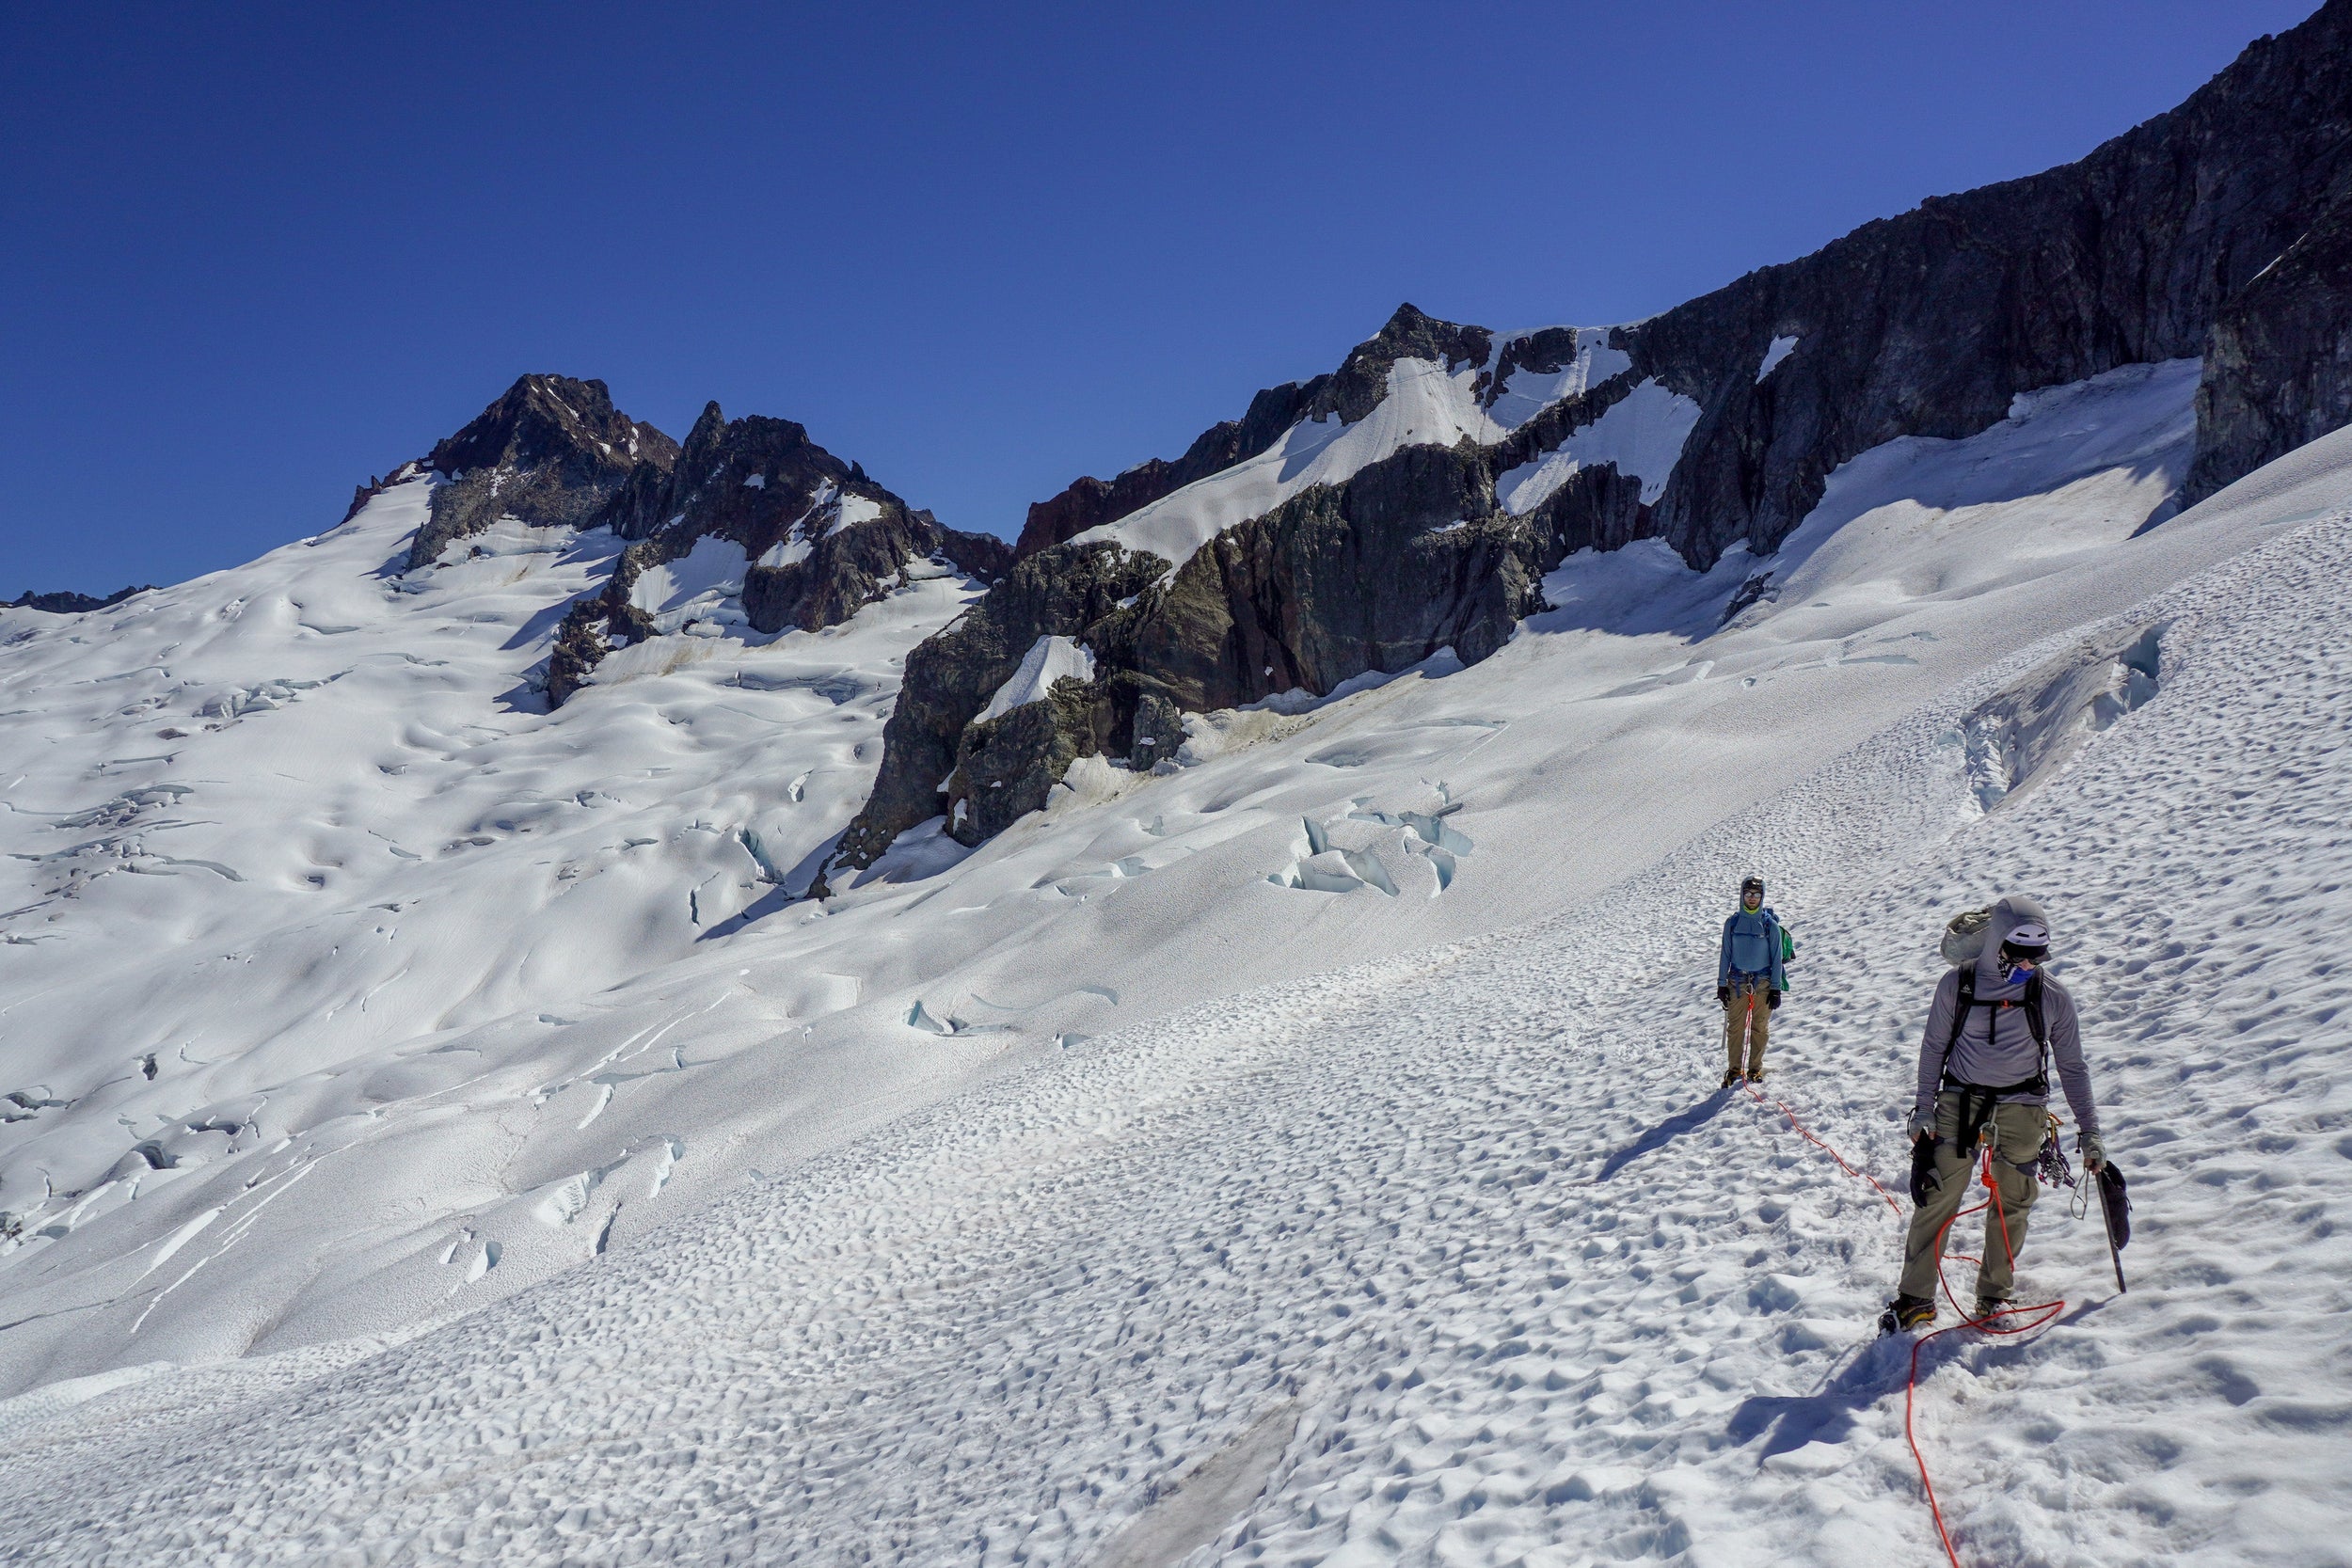 Climbers on the Boston Glacier Traverse in the North Cascades during a Blackbird Guides Mountaineering Basics course